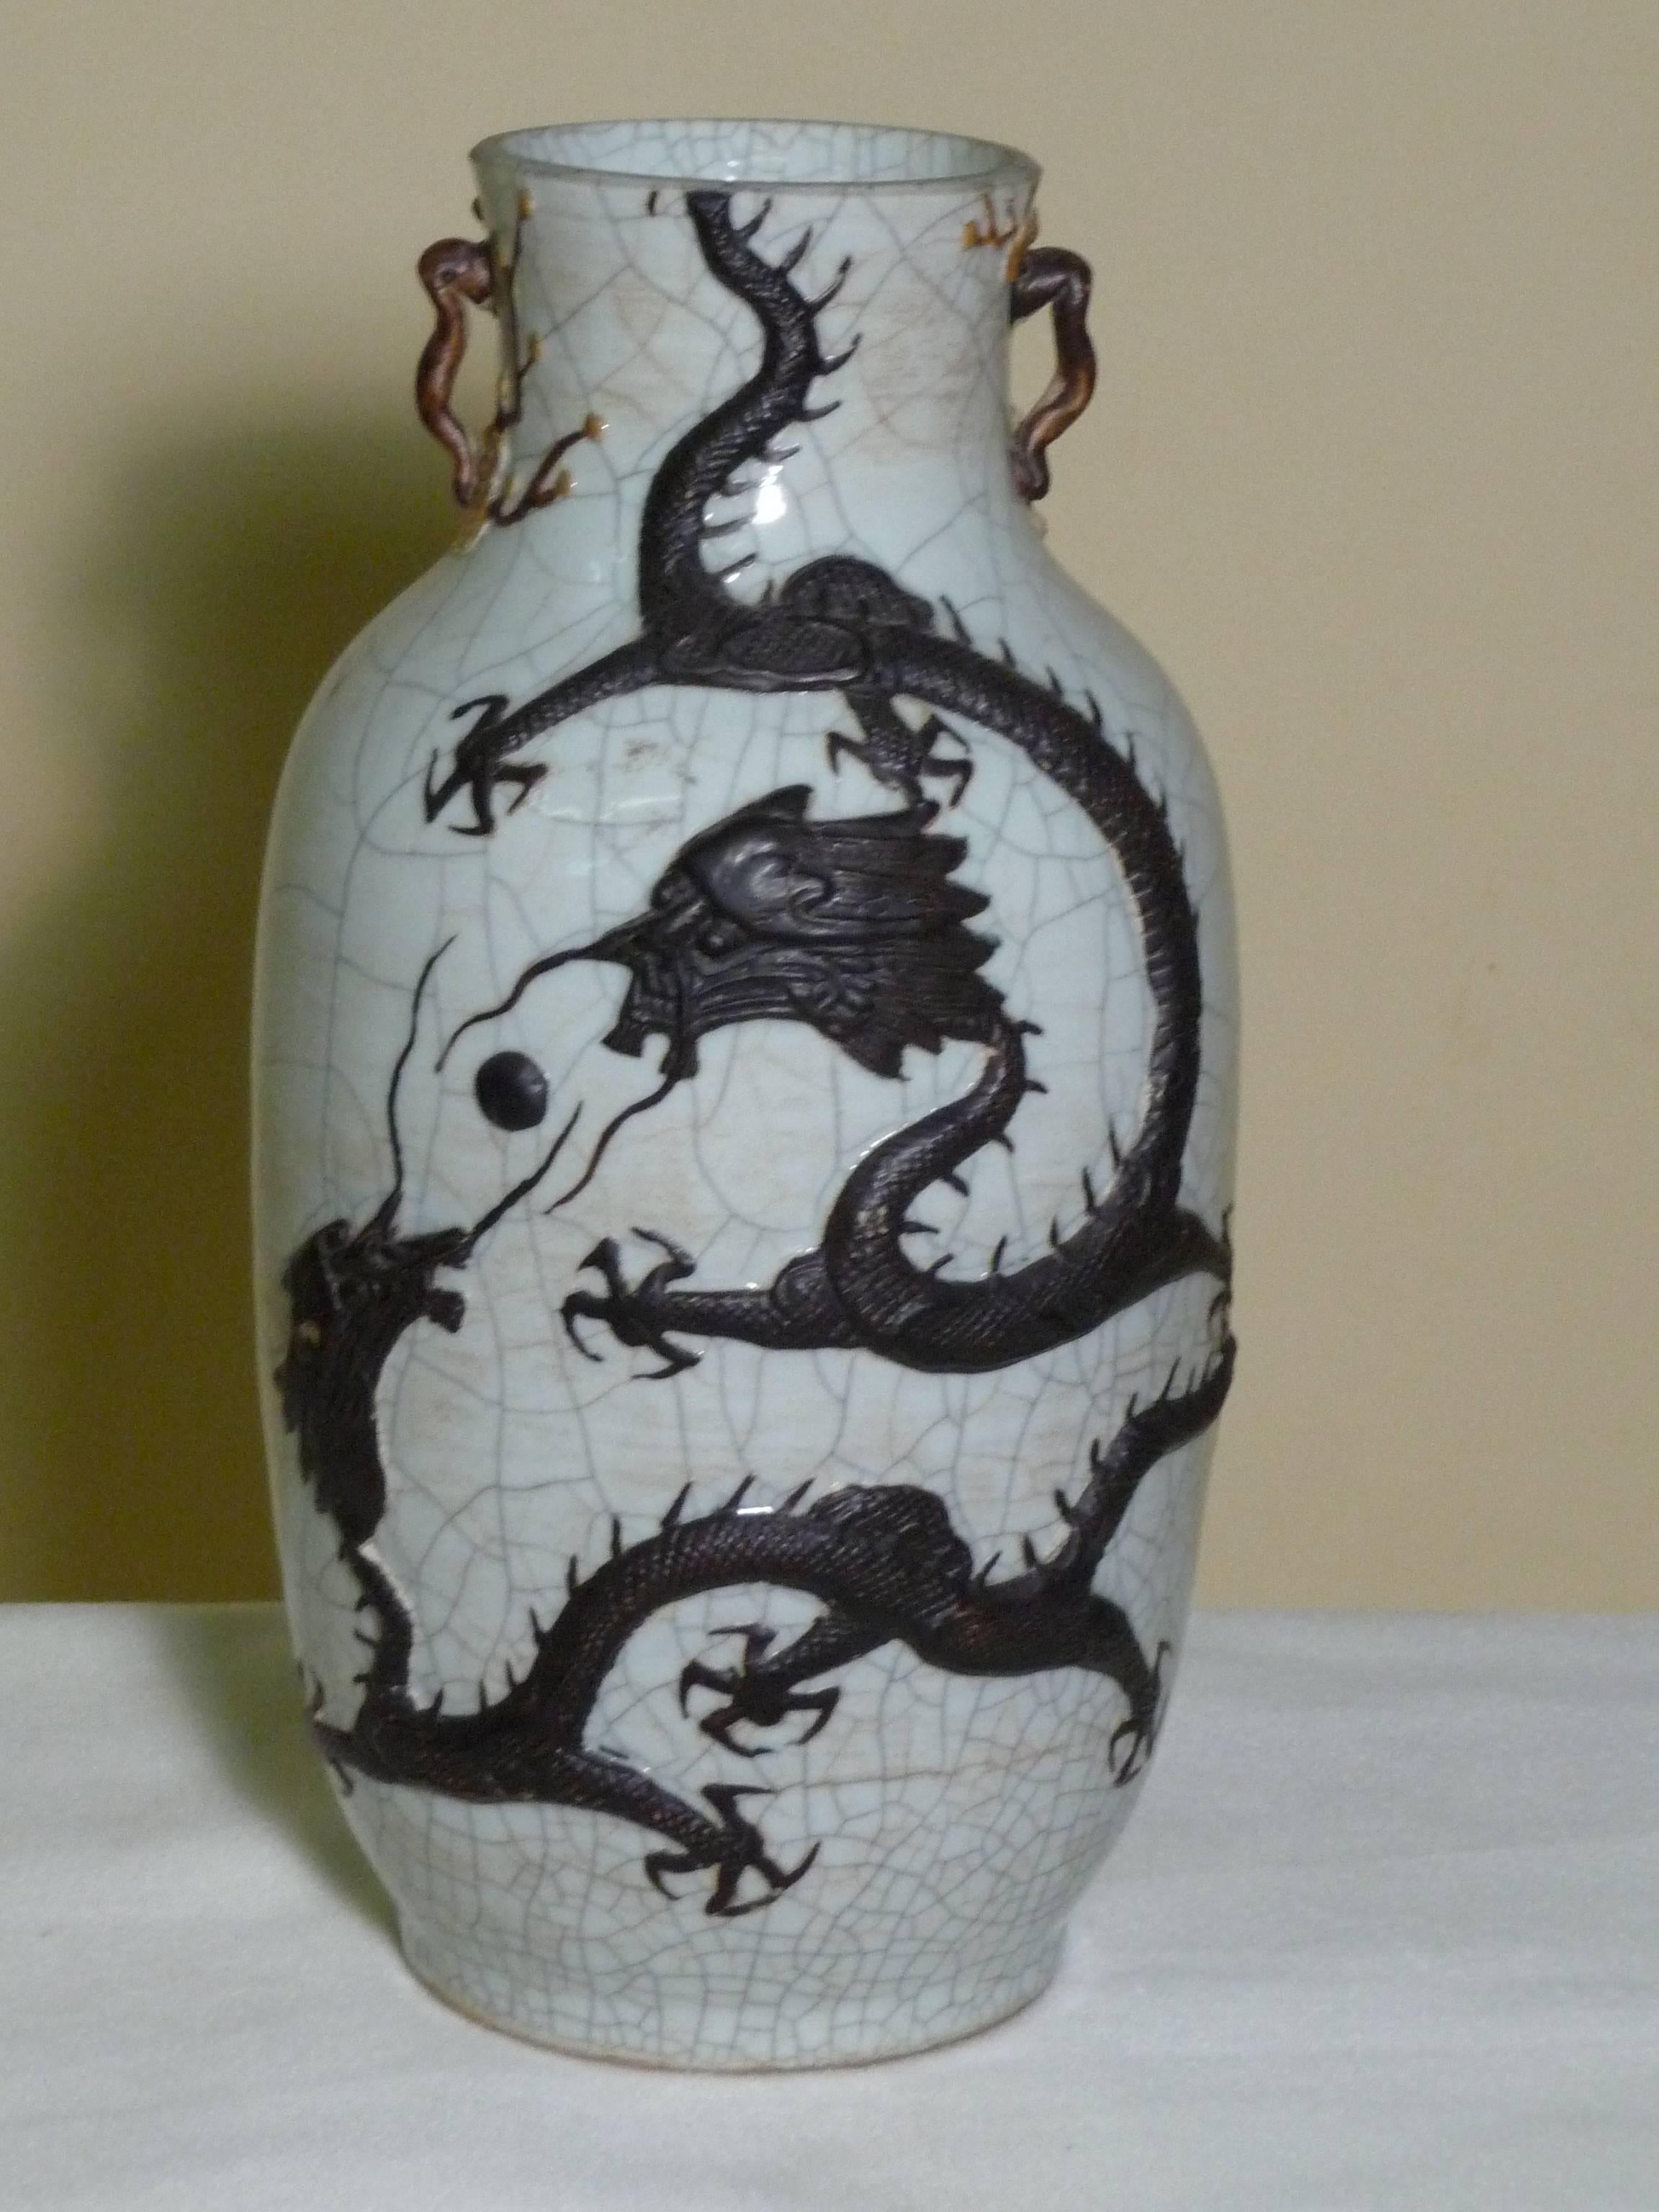 Chinese Qing Dynasty large baluster form stoneware vase, celadon crackle glaze finish with high relief iron stained clawed dragons, and crane. Small handles with plum blossoms enhanced with enamels-late 19th century.  

Guangxu period-1875-1908